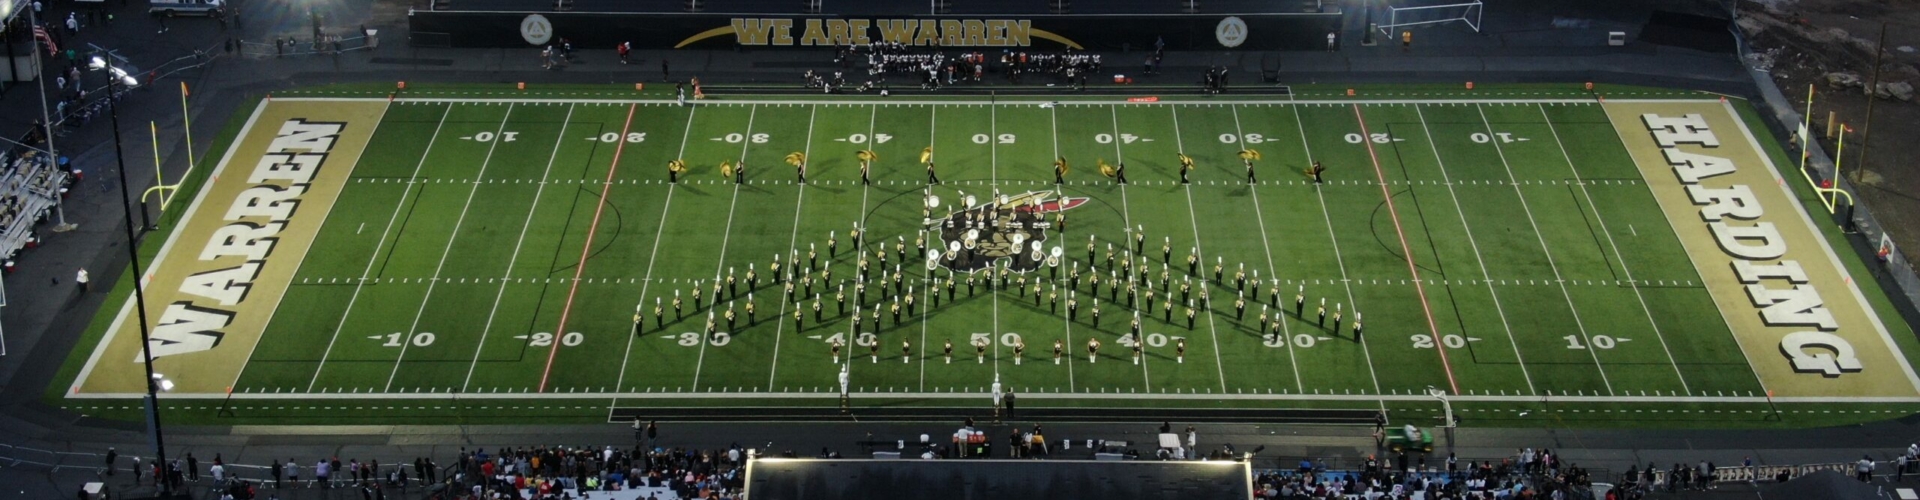 Marching Band Drone Shot